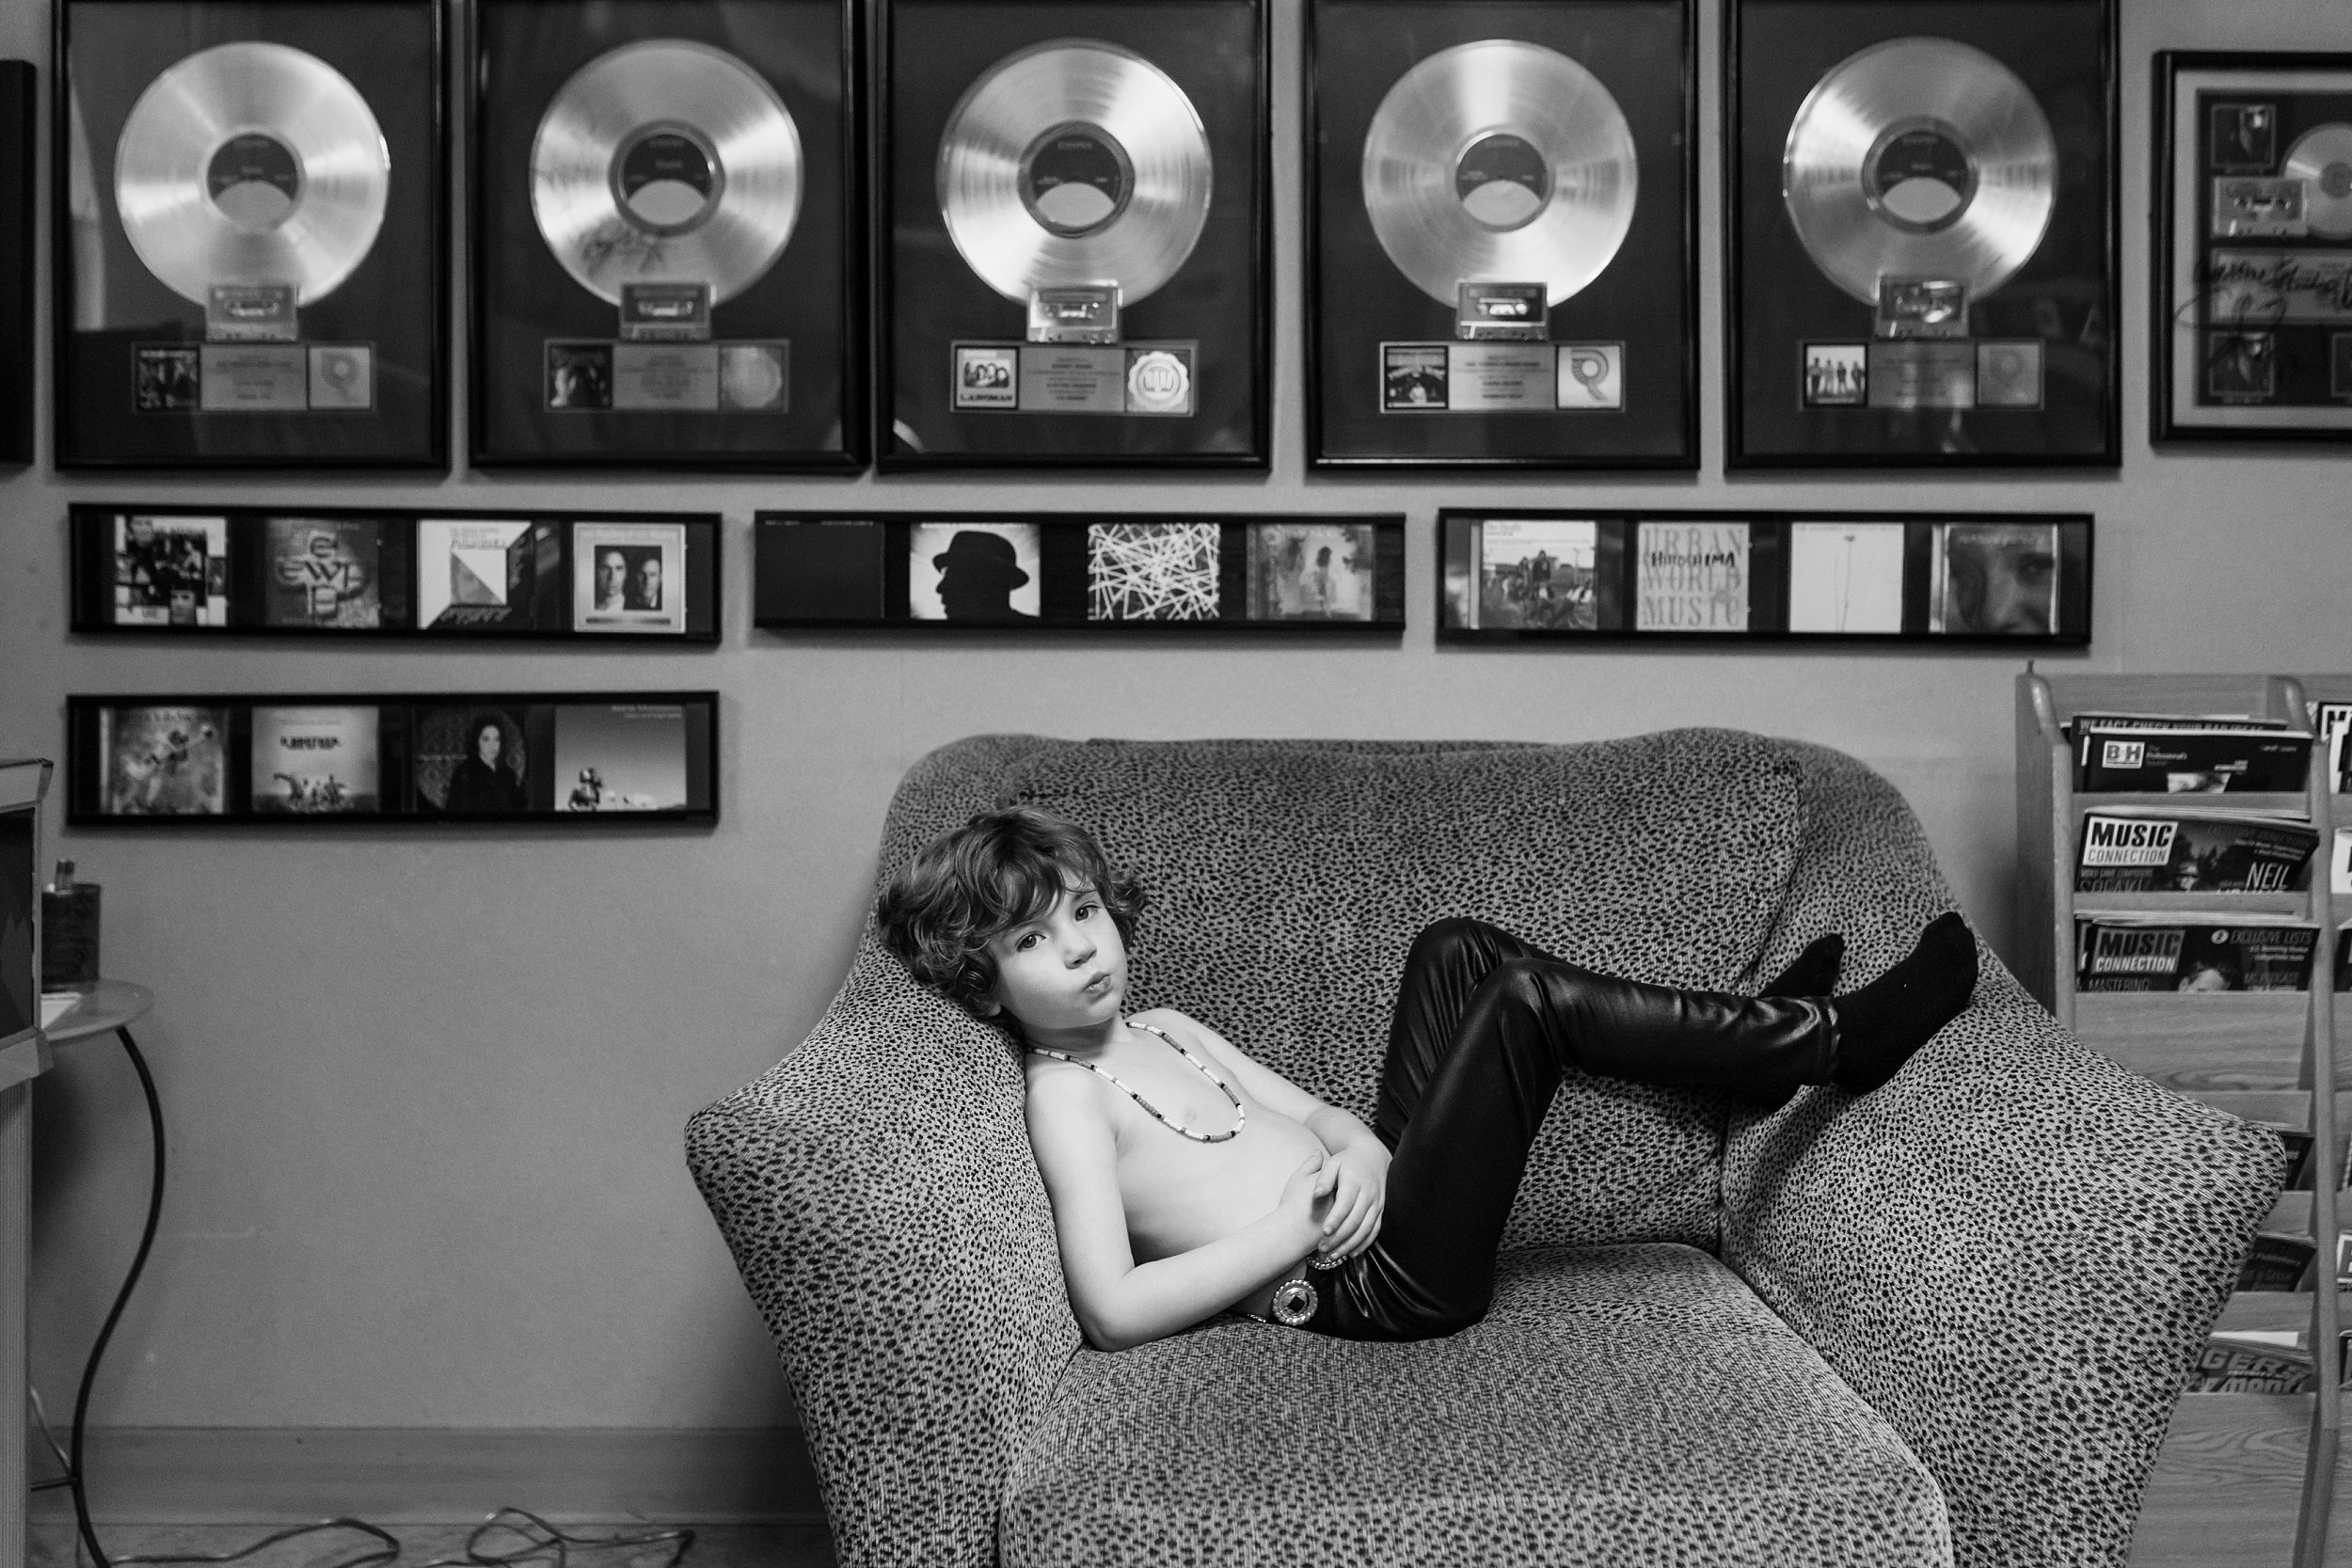 5 year old at Sunset Studios as Jim Morrison from The Doors by A Pocket of Time Photography